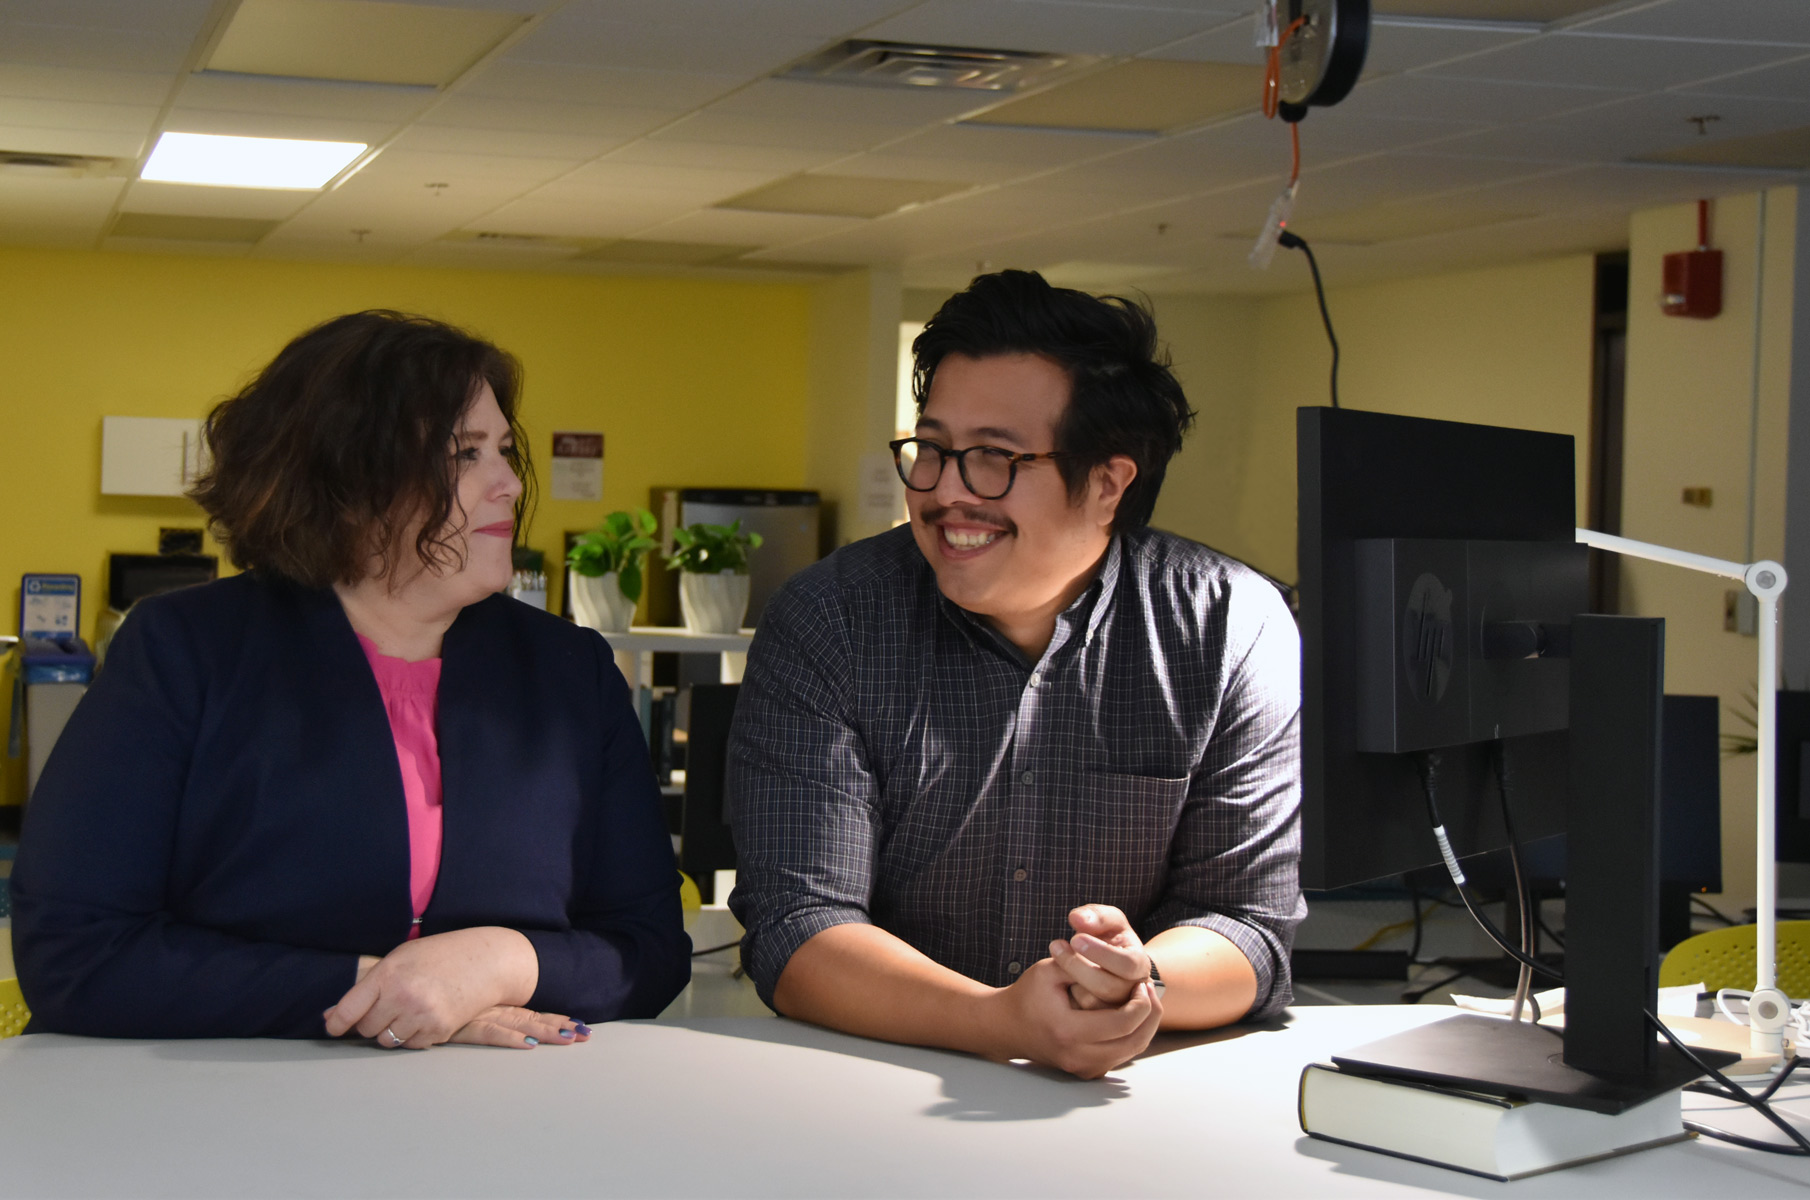 CID Graduate Student Fellow Giovanni Roman Torres and Student Fellow Shauna Dyer sit at a work station in the Stone Center for Inequality Dynamics